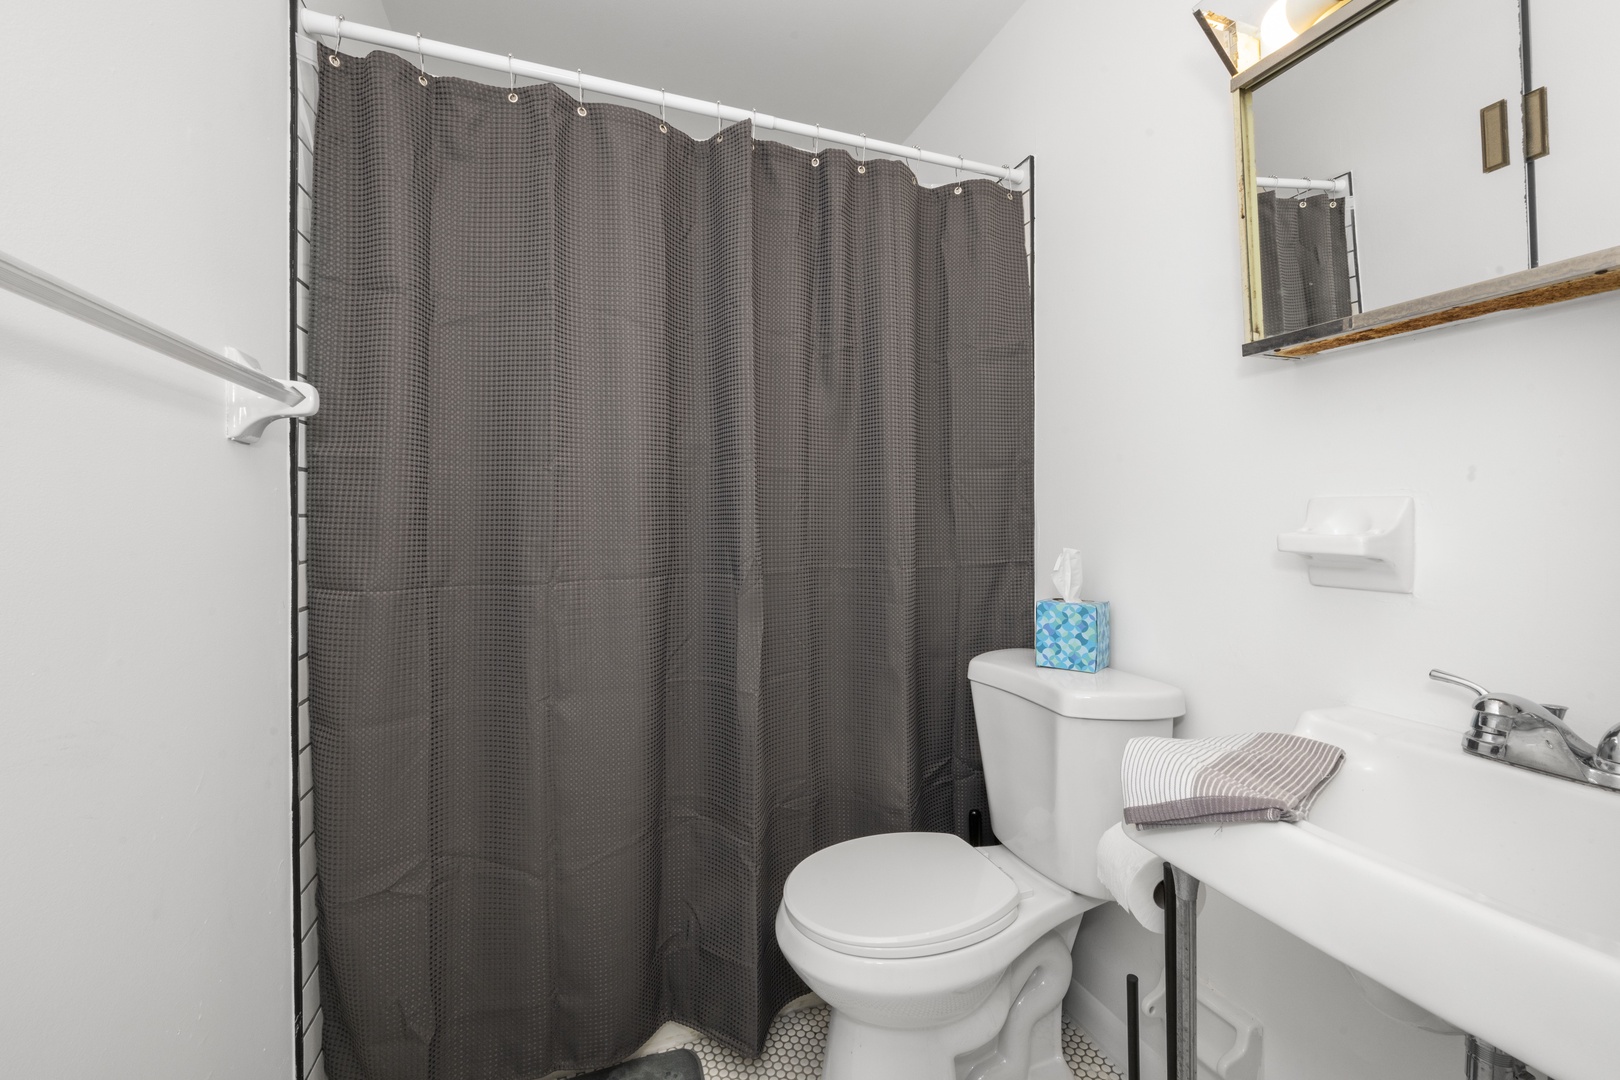 Suite 3: The chic full bath offers a single vanity & shower/tub combo